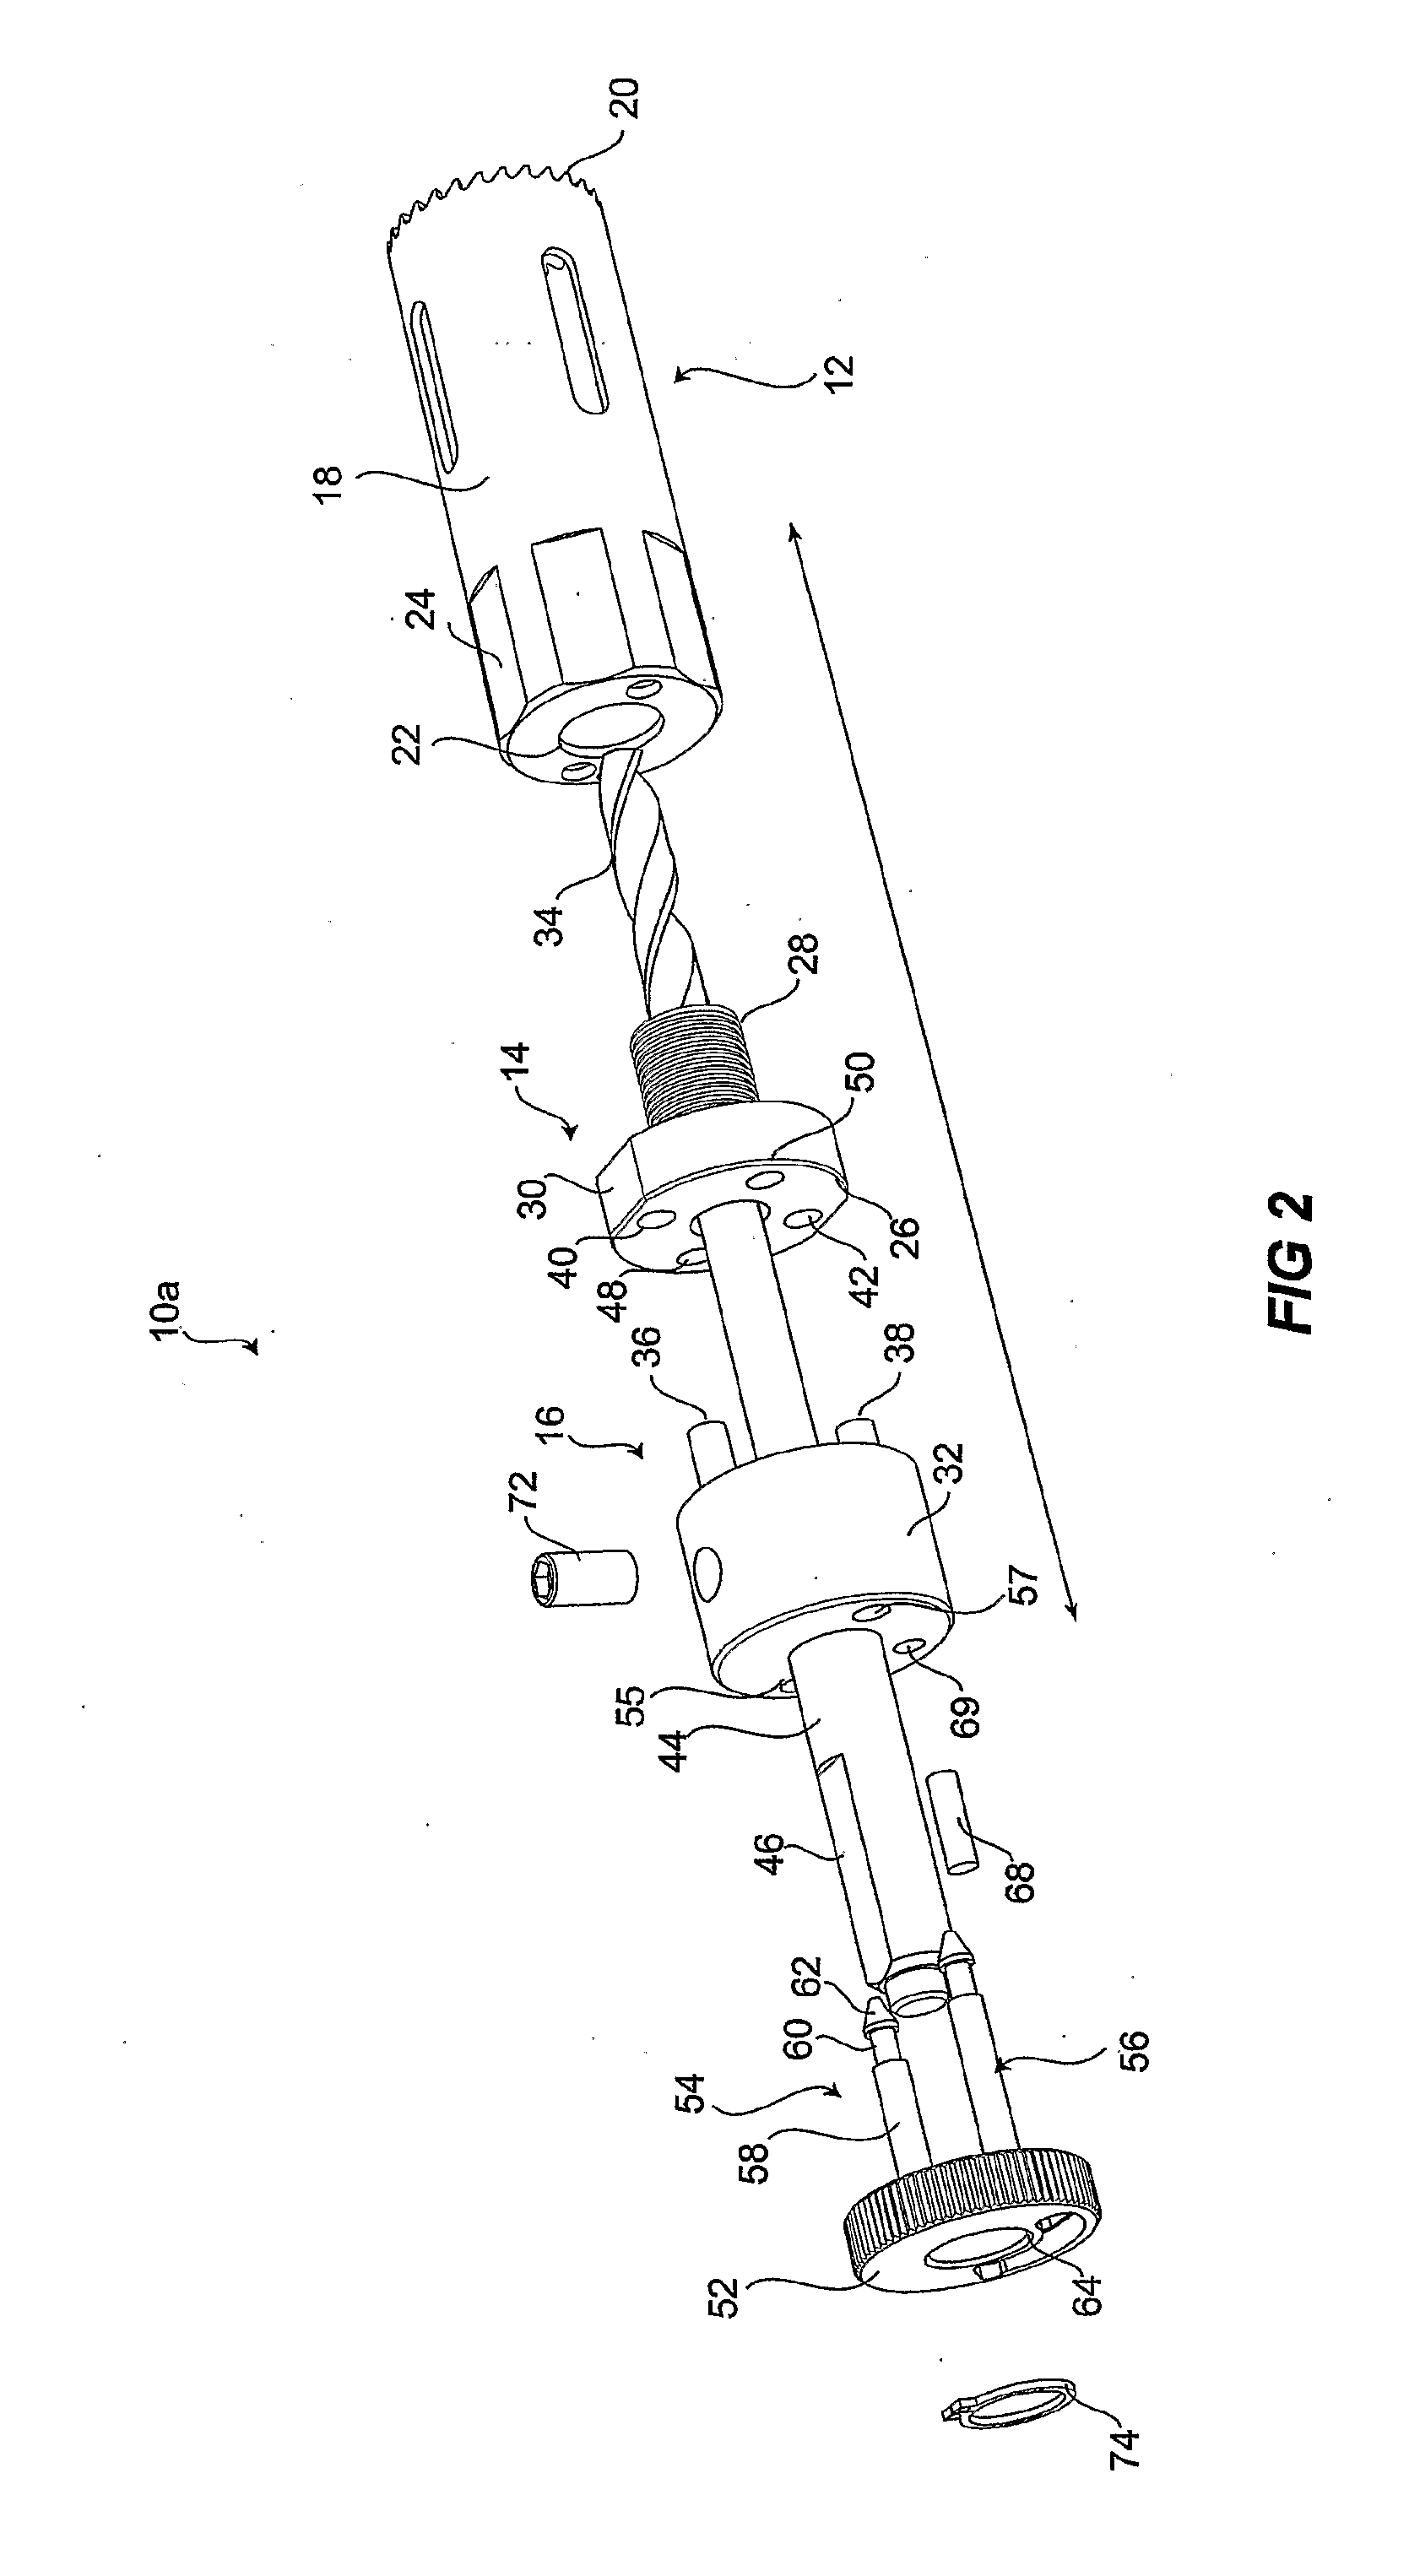 Hole saw assembly including drive shafts supported by a rotatable annulus